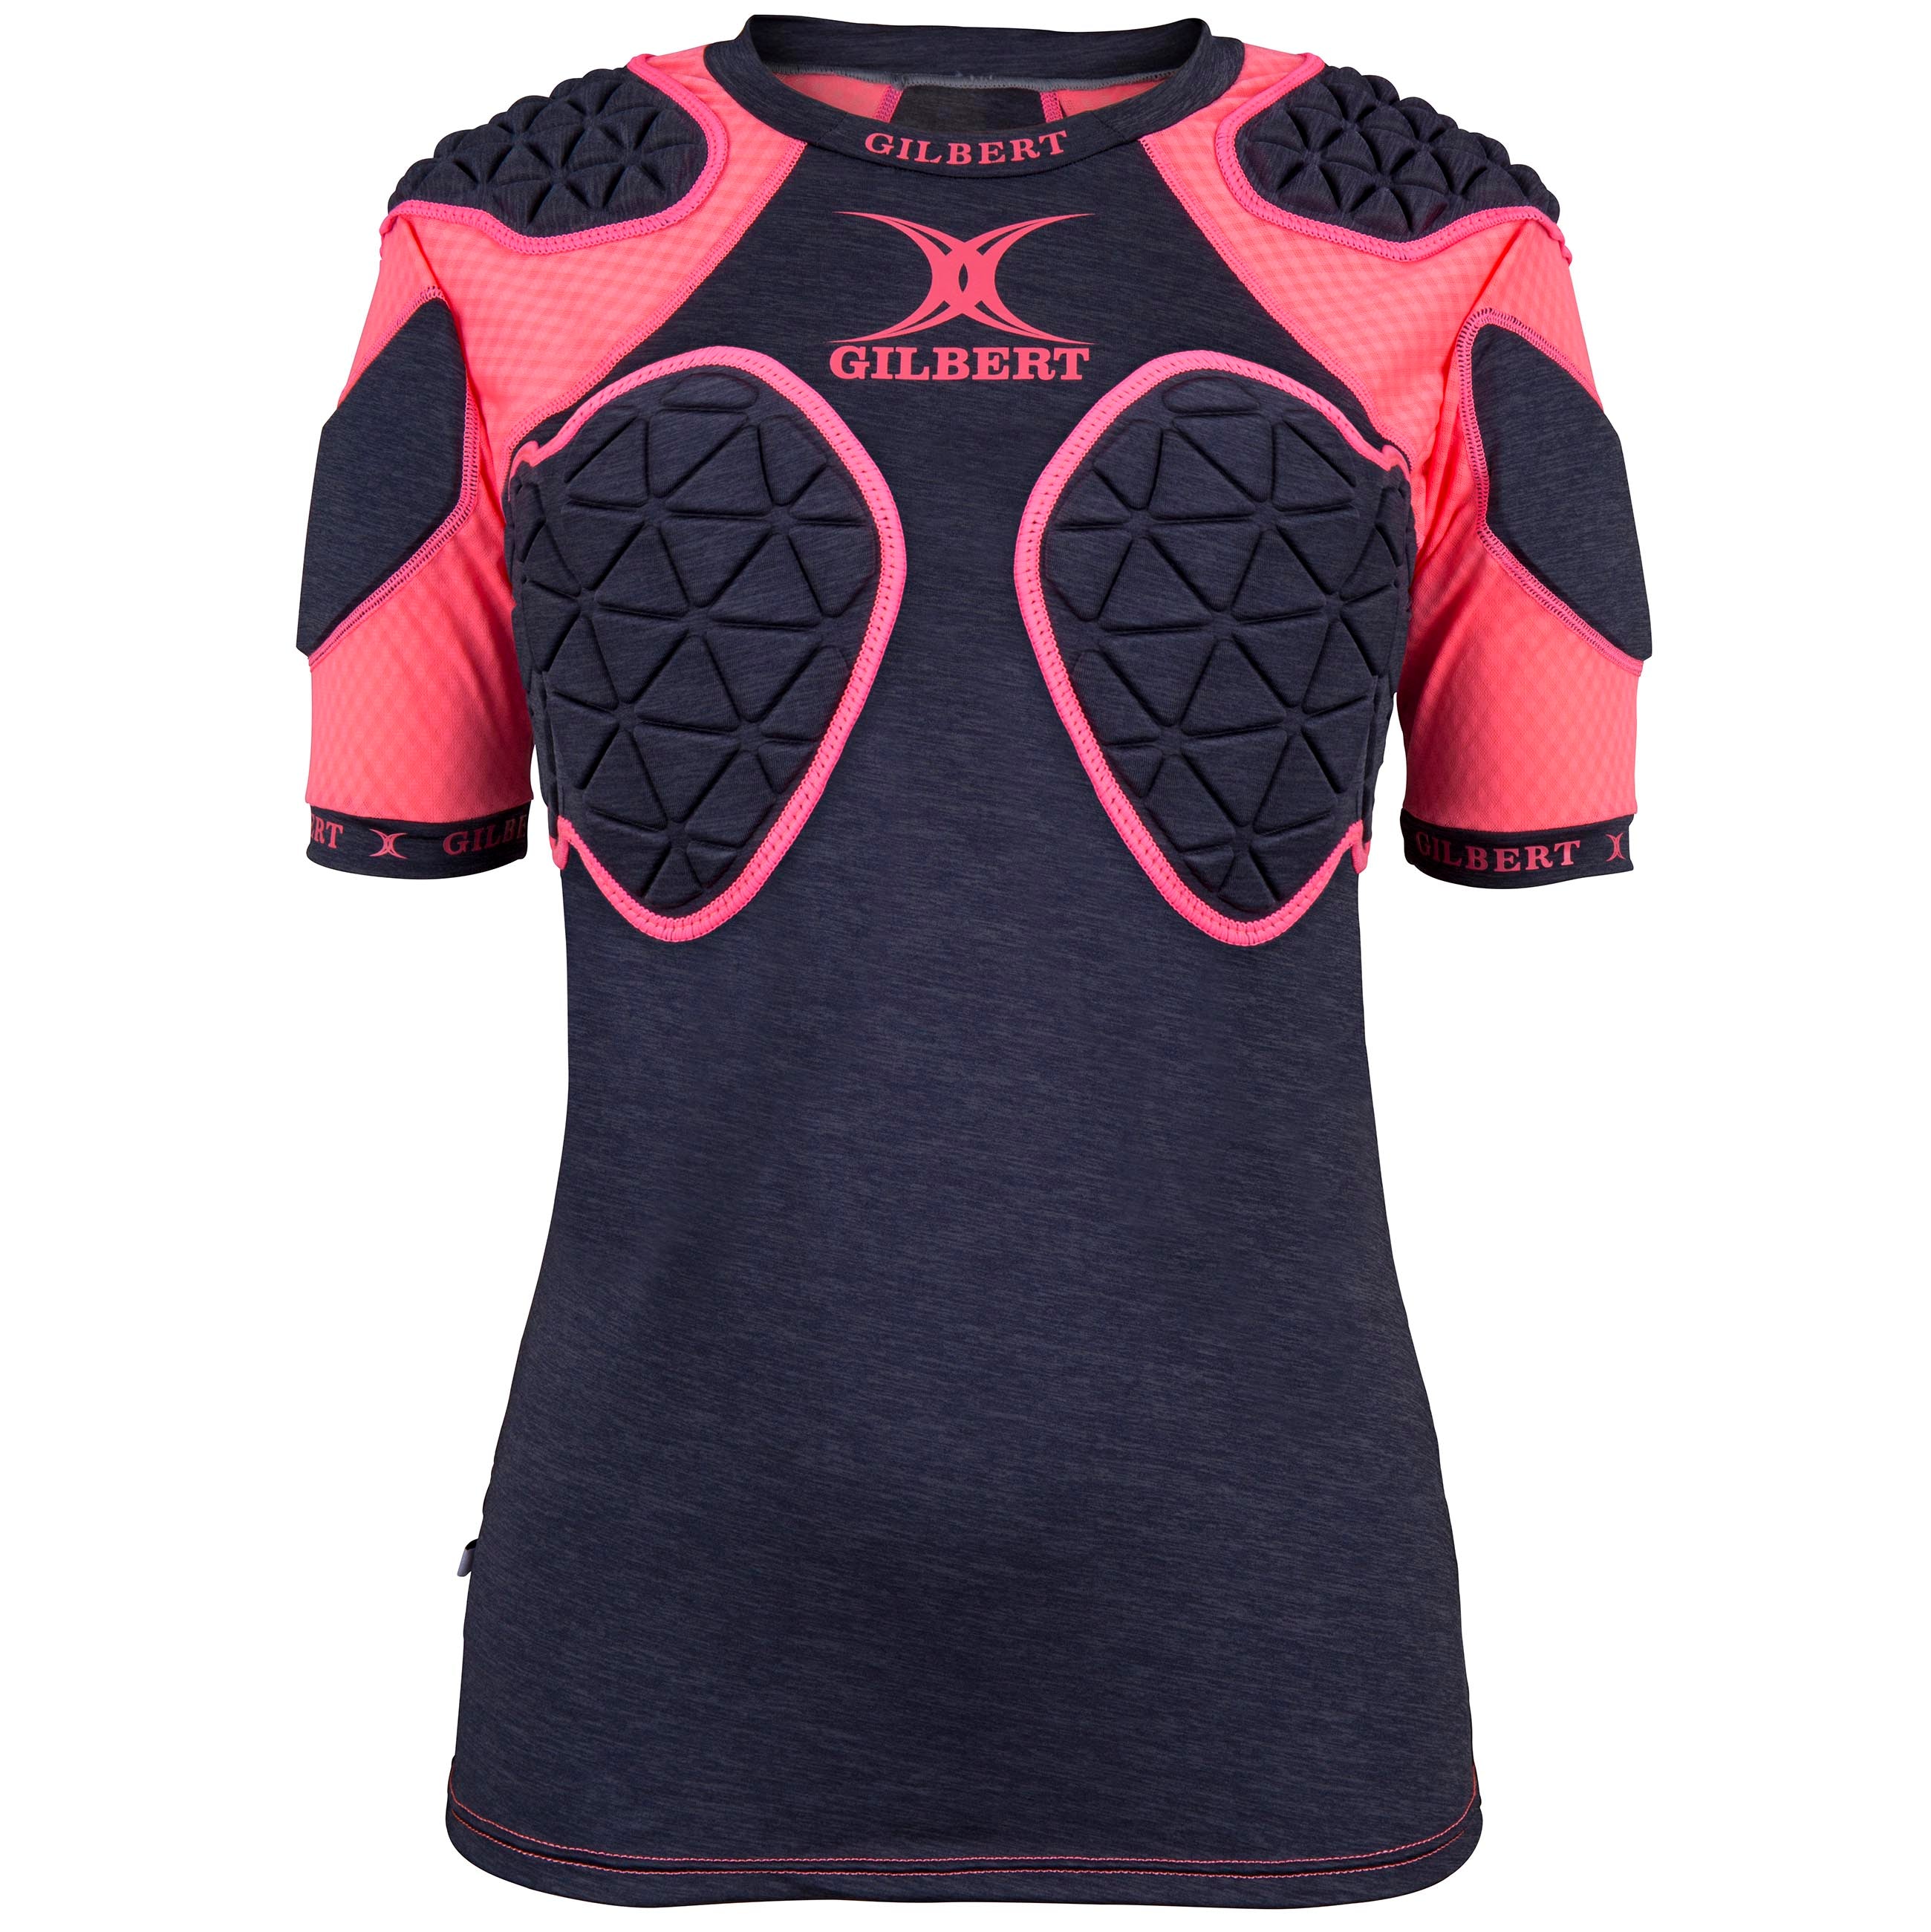 Womens Rugby Match Wear, Made for Womens Rugby